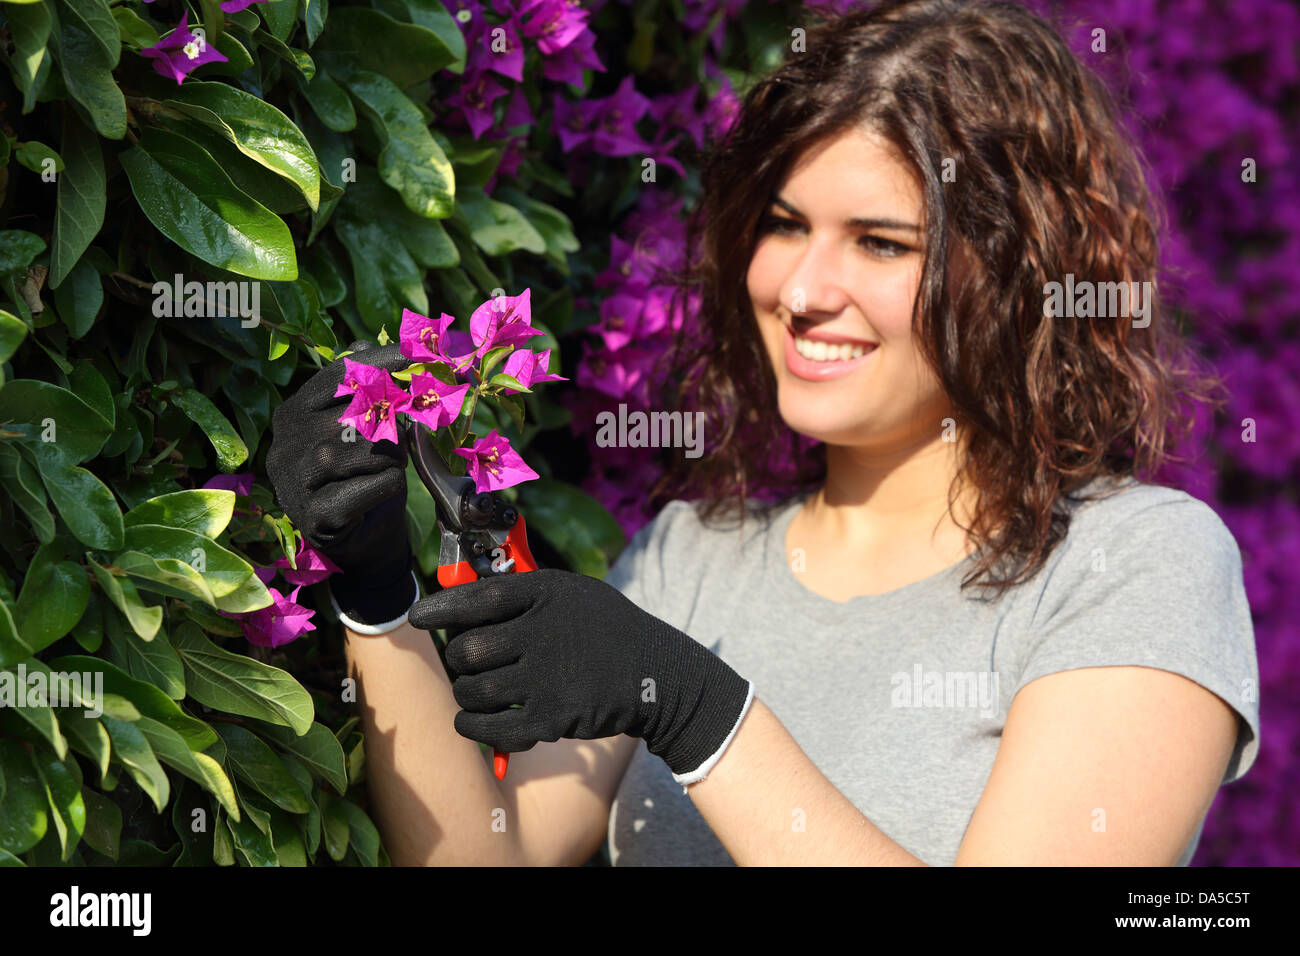 Close up of a gardener woman with gloves cutting a pink flower with secateurs Stock Photo